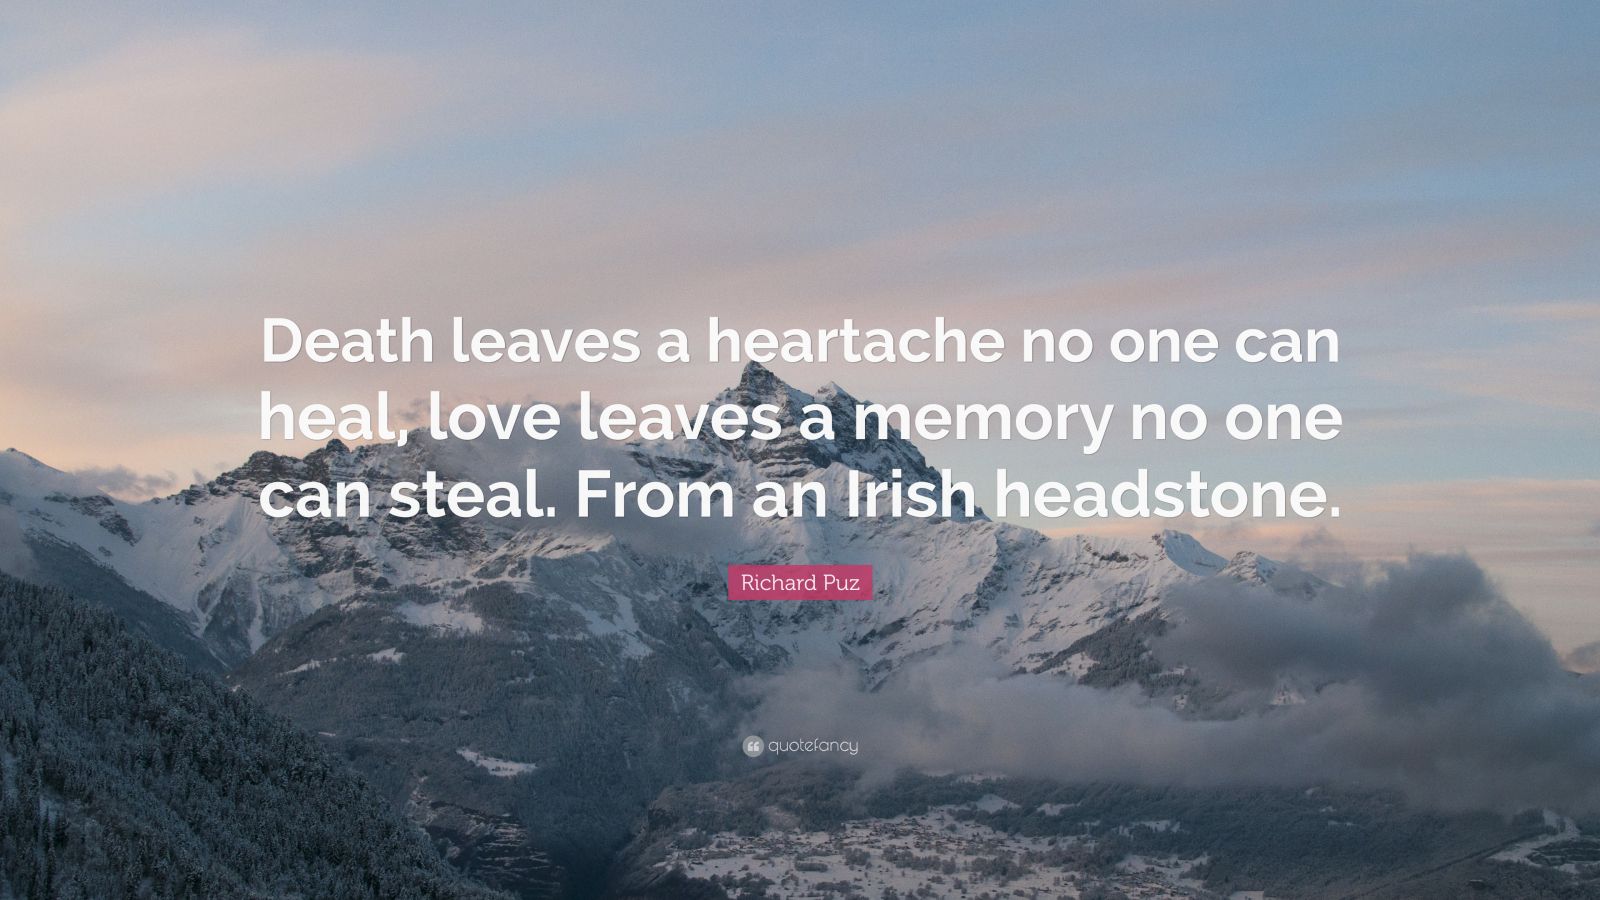 Richard Puz Quote: “Death leaves a heartache no one can heal, love ...